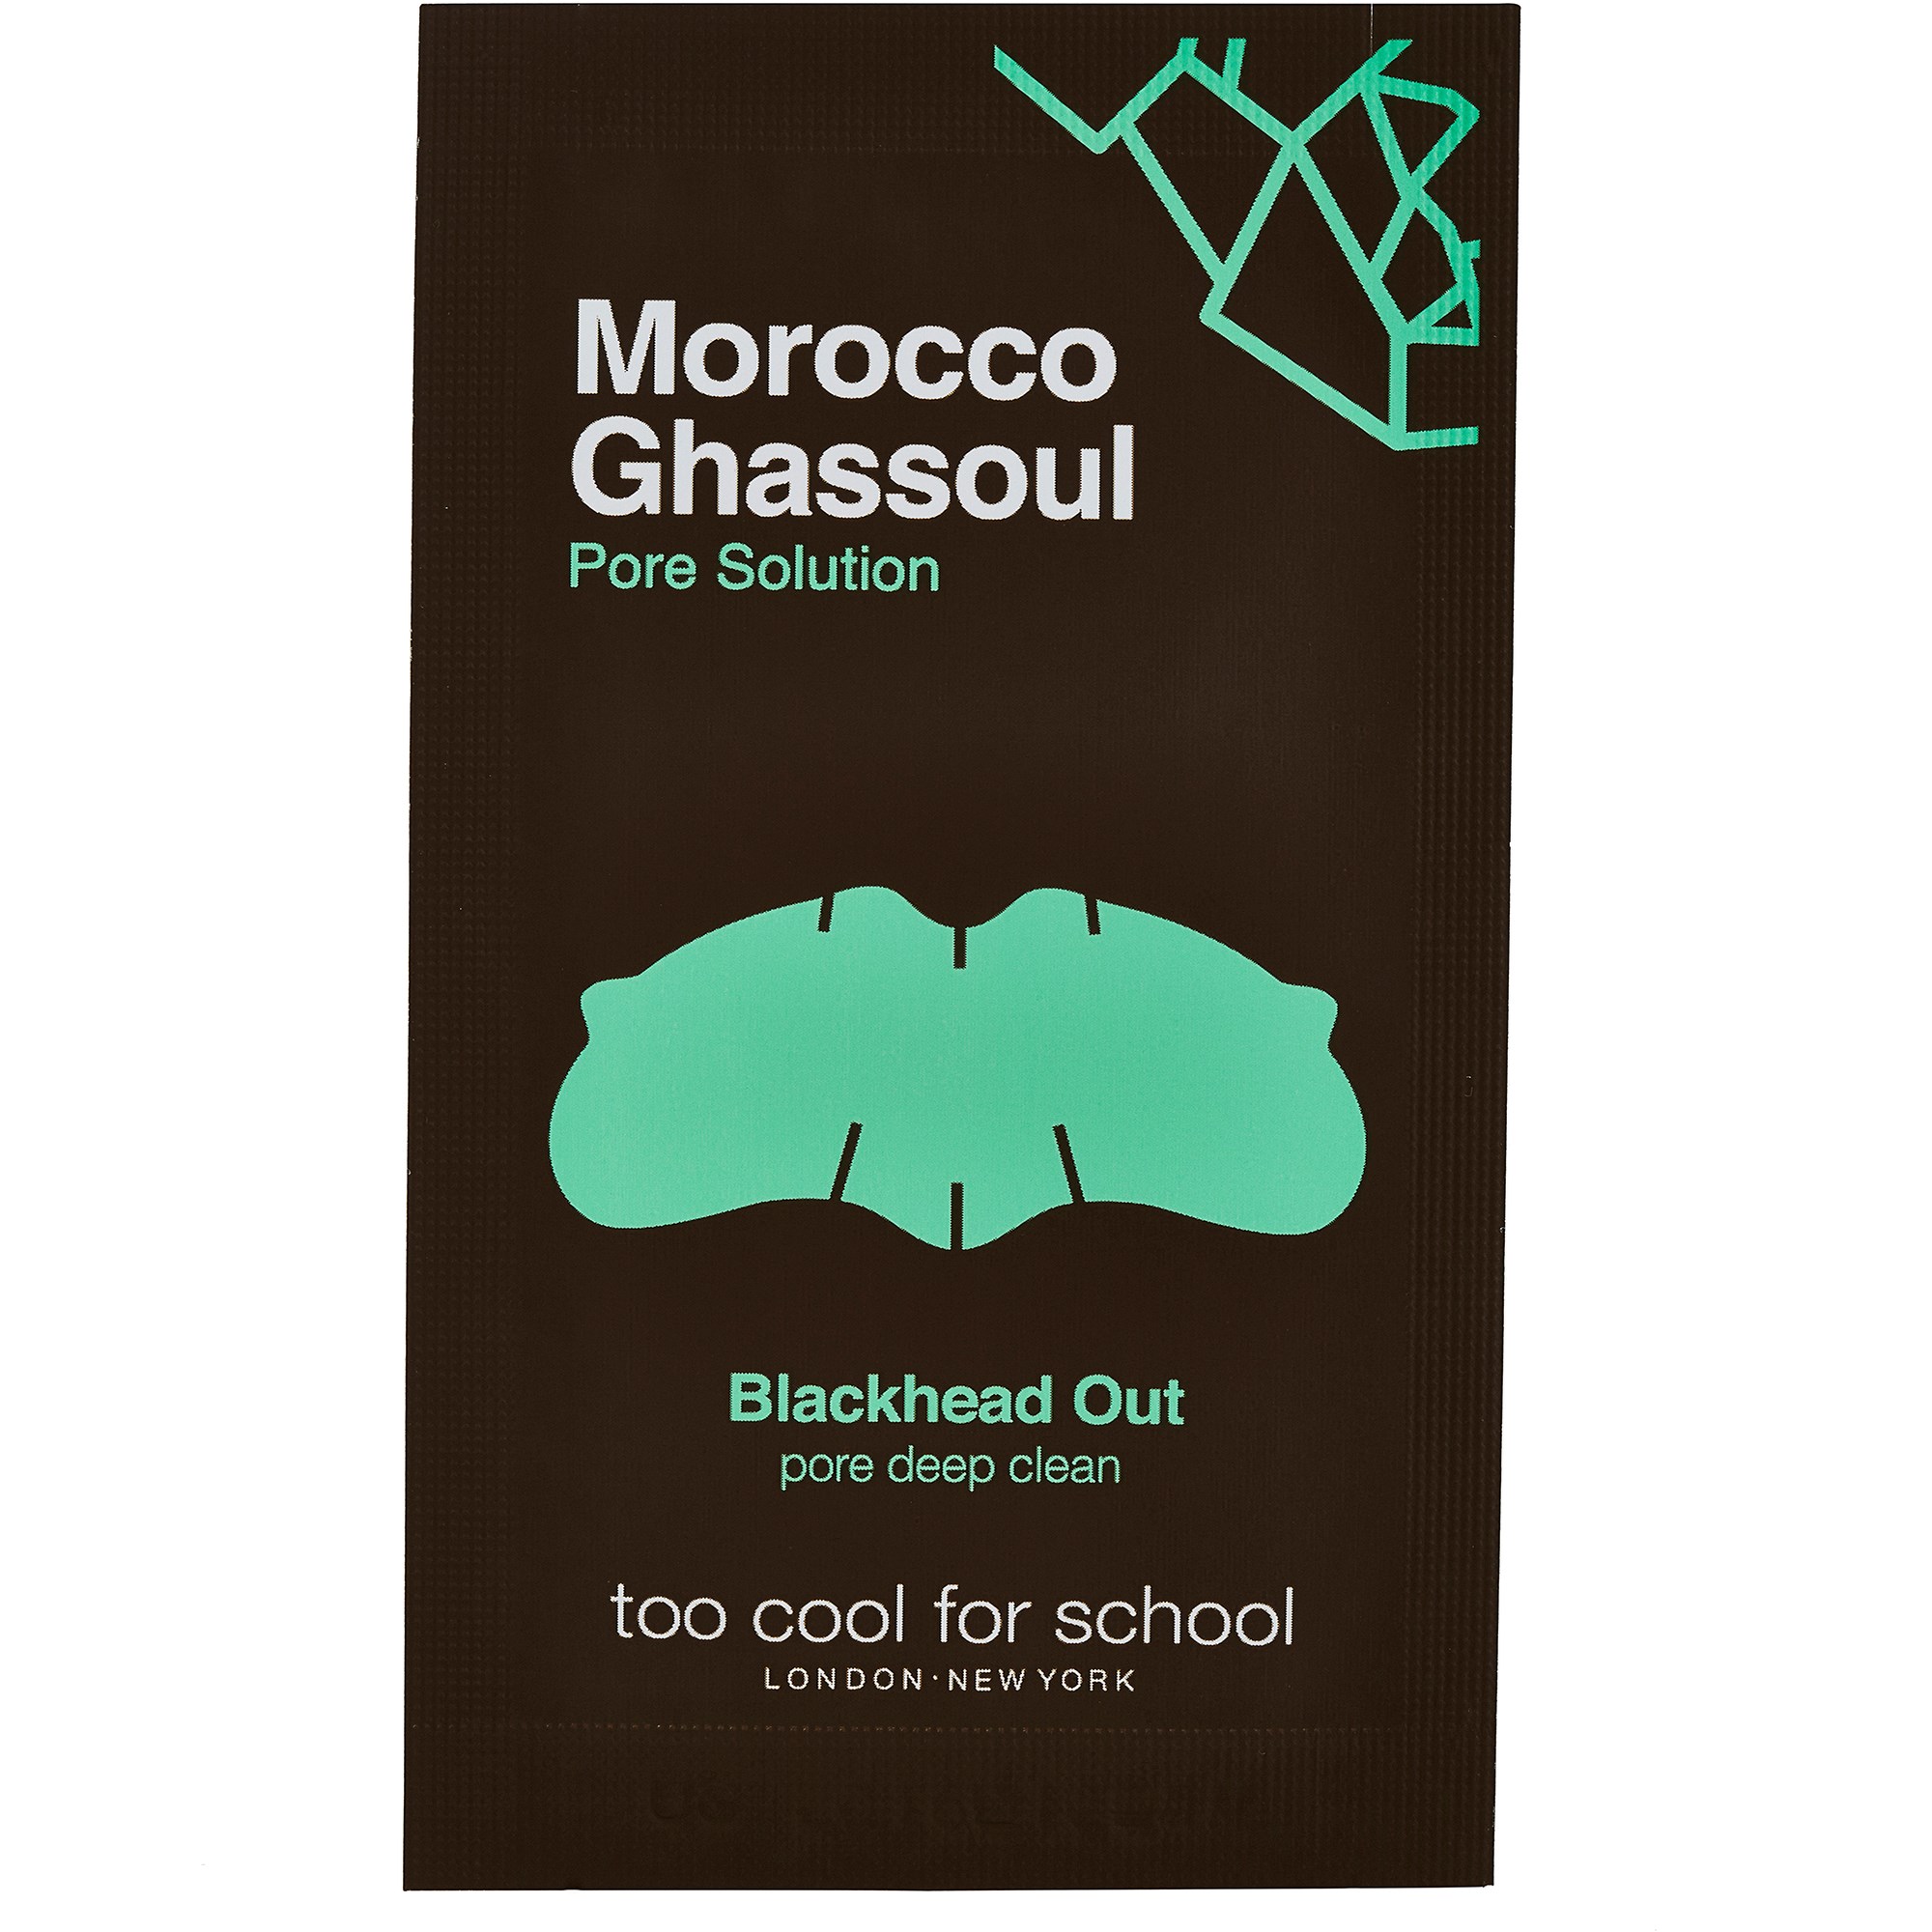 Too Cool For School Morocco Ghassoul Blackhead Out 1 St.